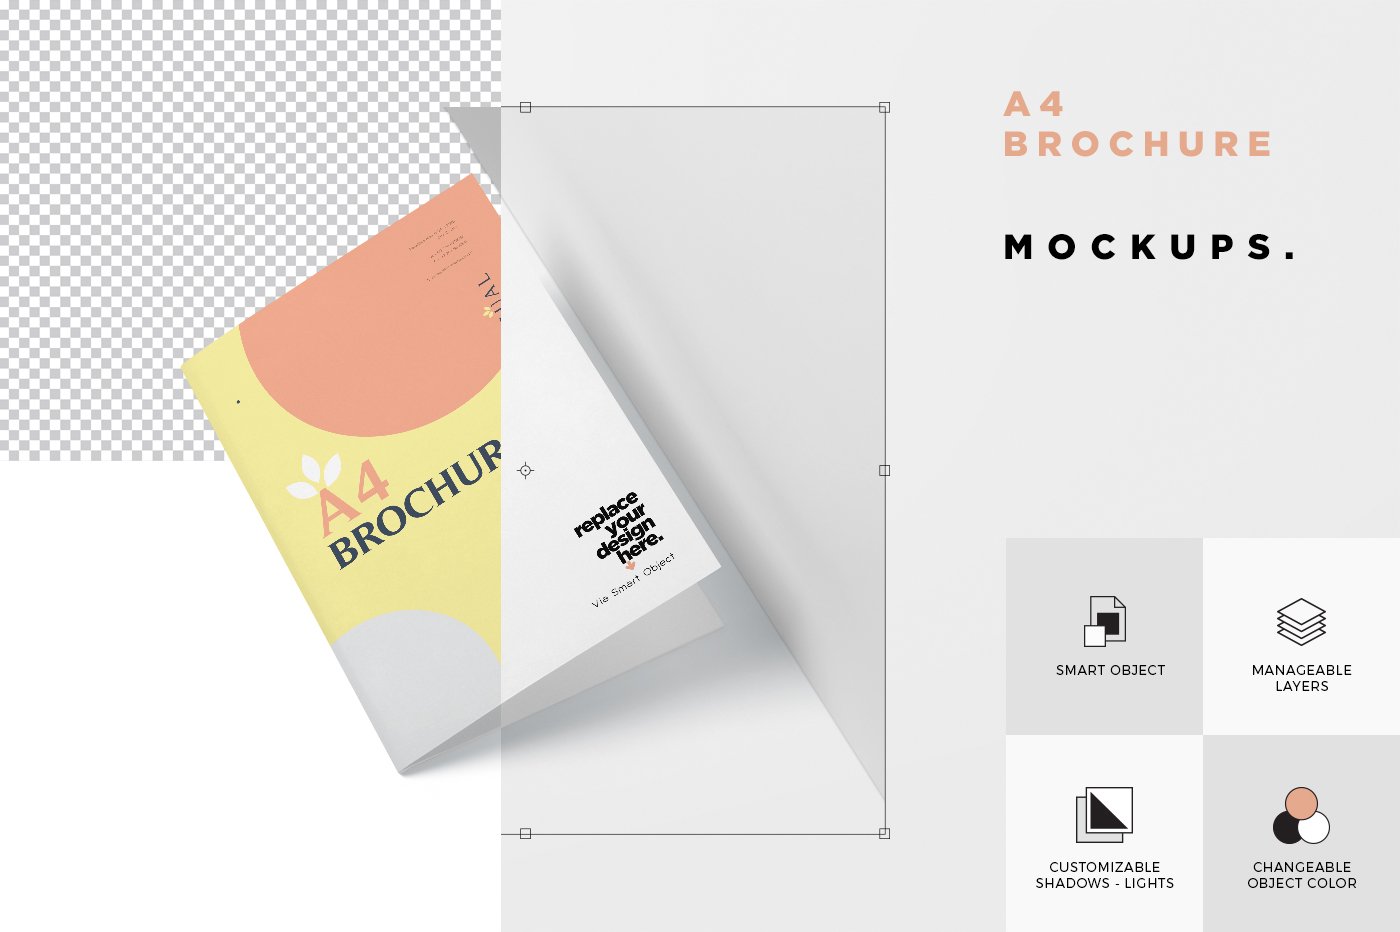 mockup features image 228